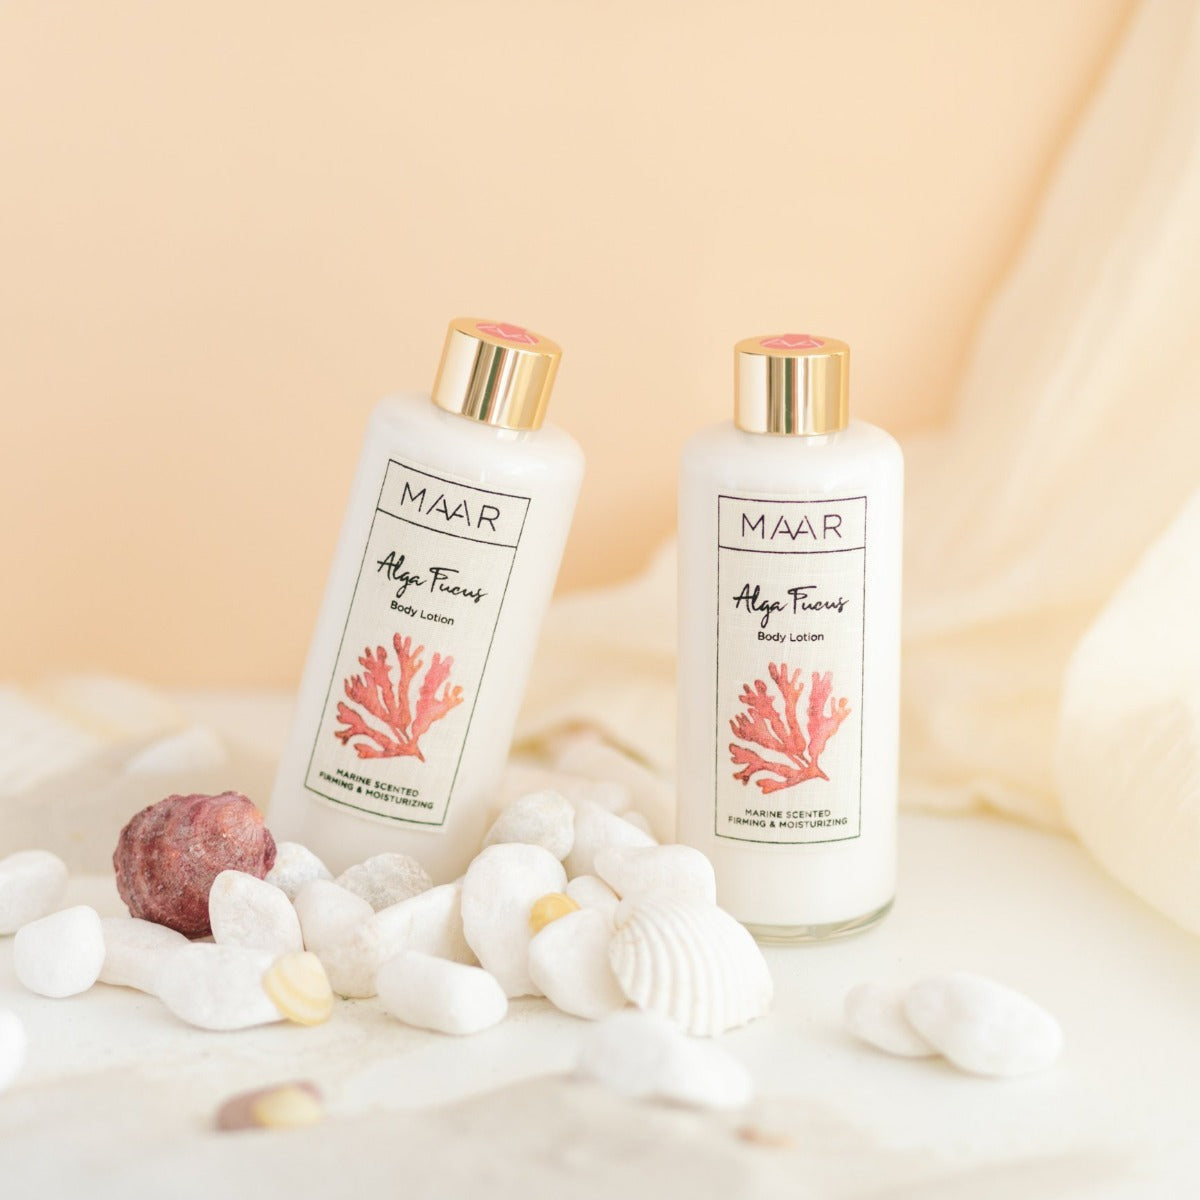 Moisturizing, firming and natural Body Lotion - MAAR